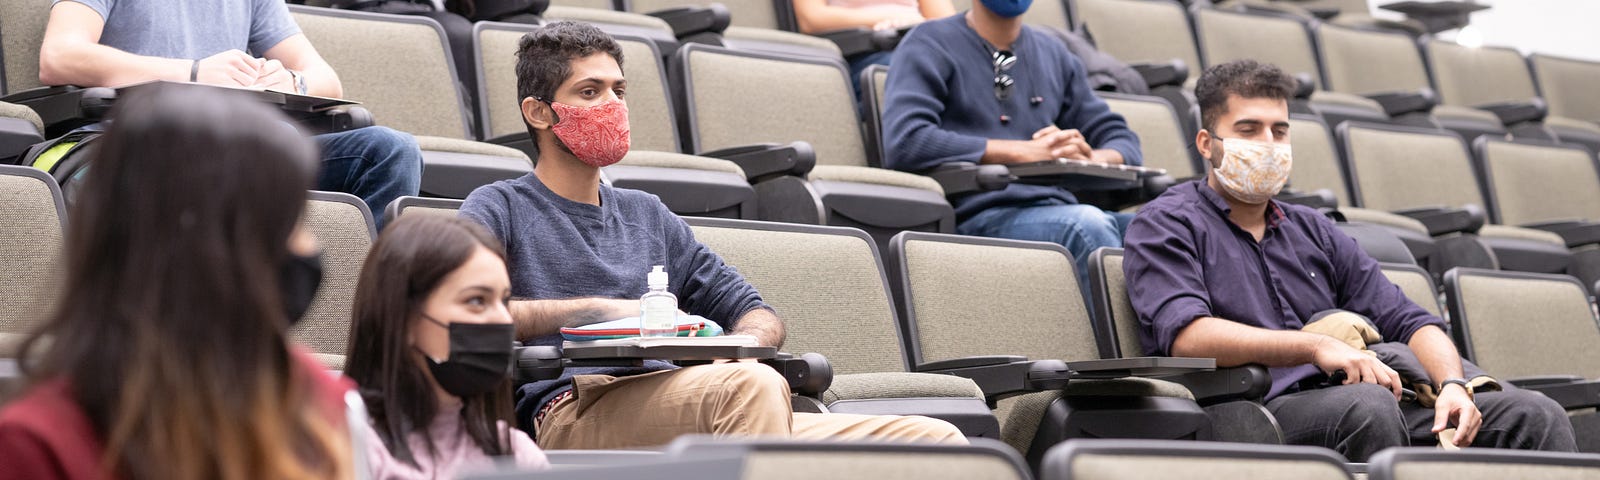 College students wearing face masks in a lecture hall. Photo by FatCamera/Getty Images